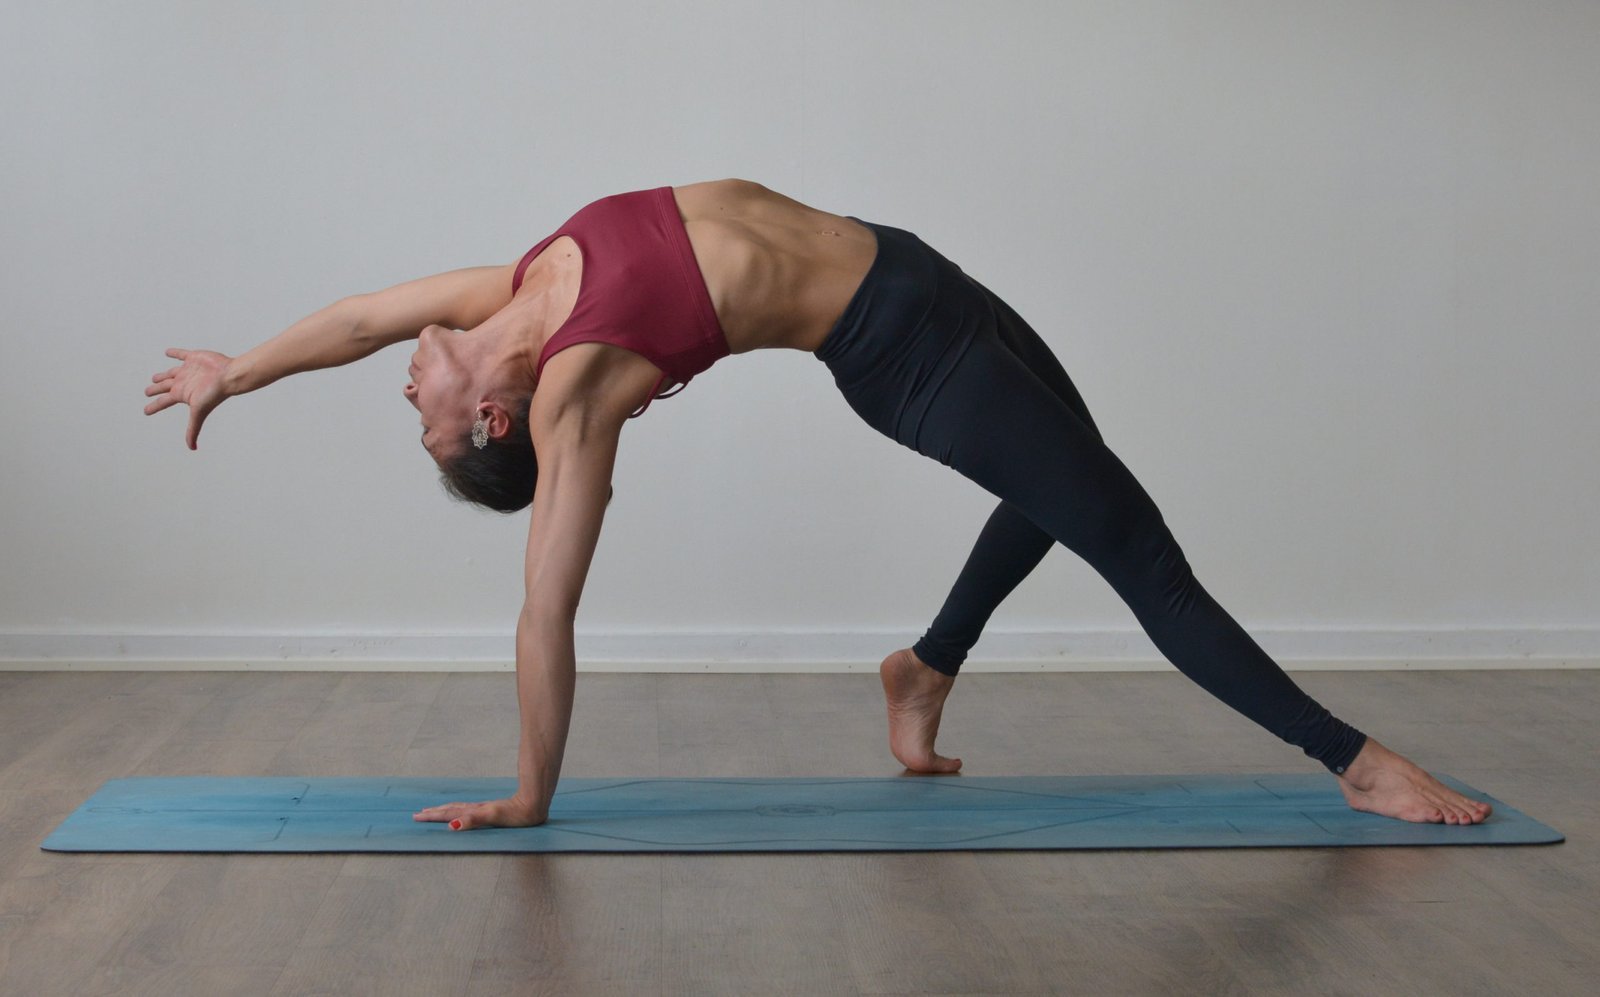 How To Do Wild Thing Yoga Pose: Step-By-Step Tutorial